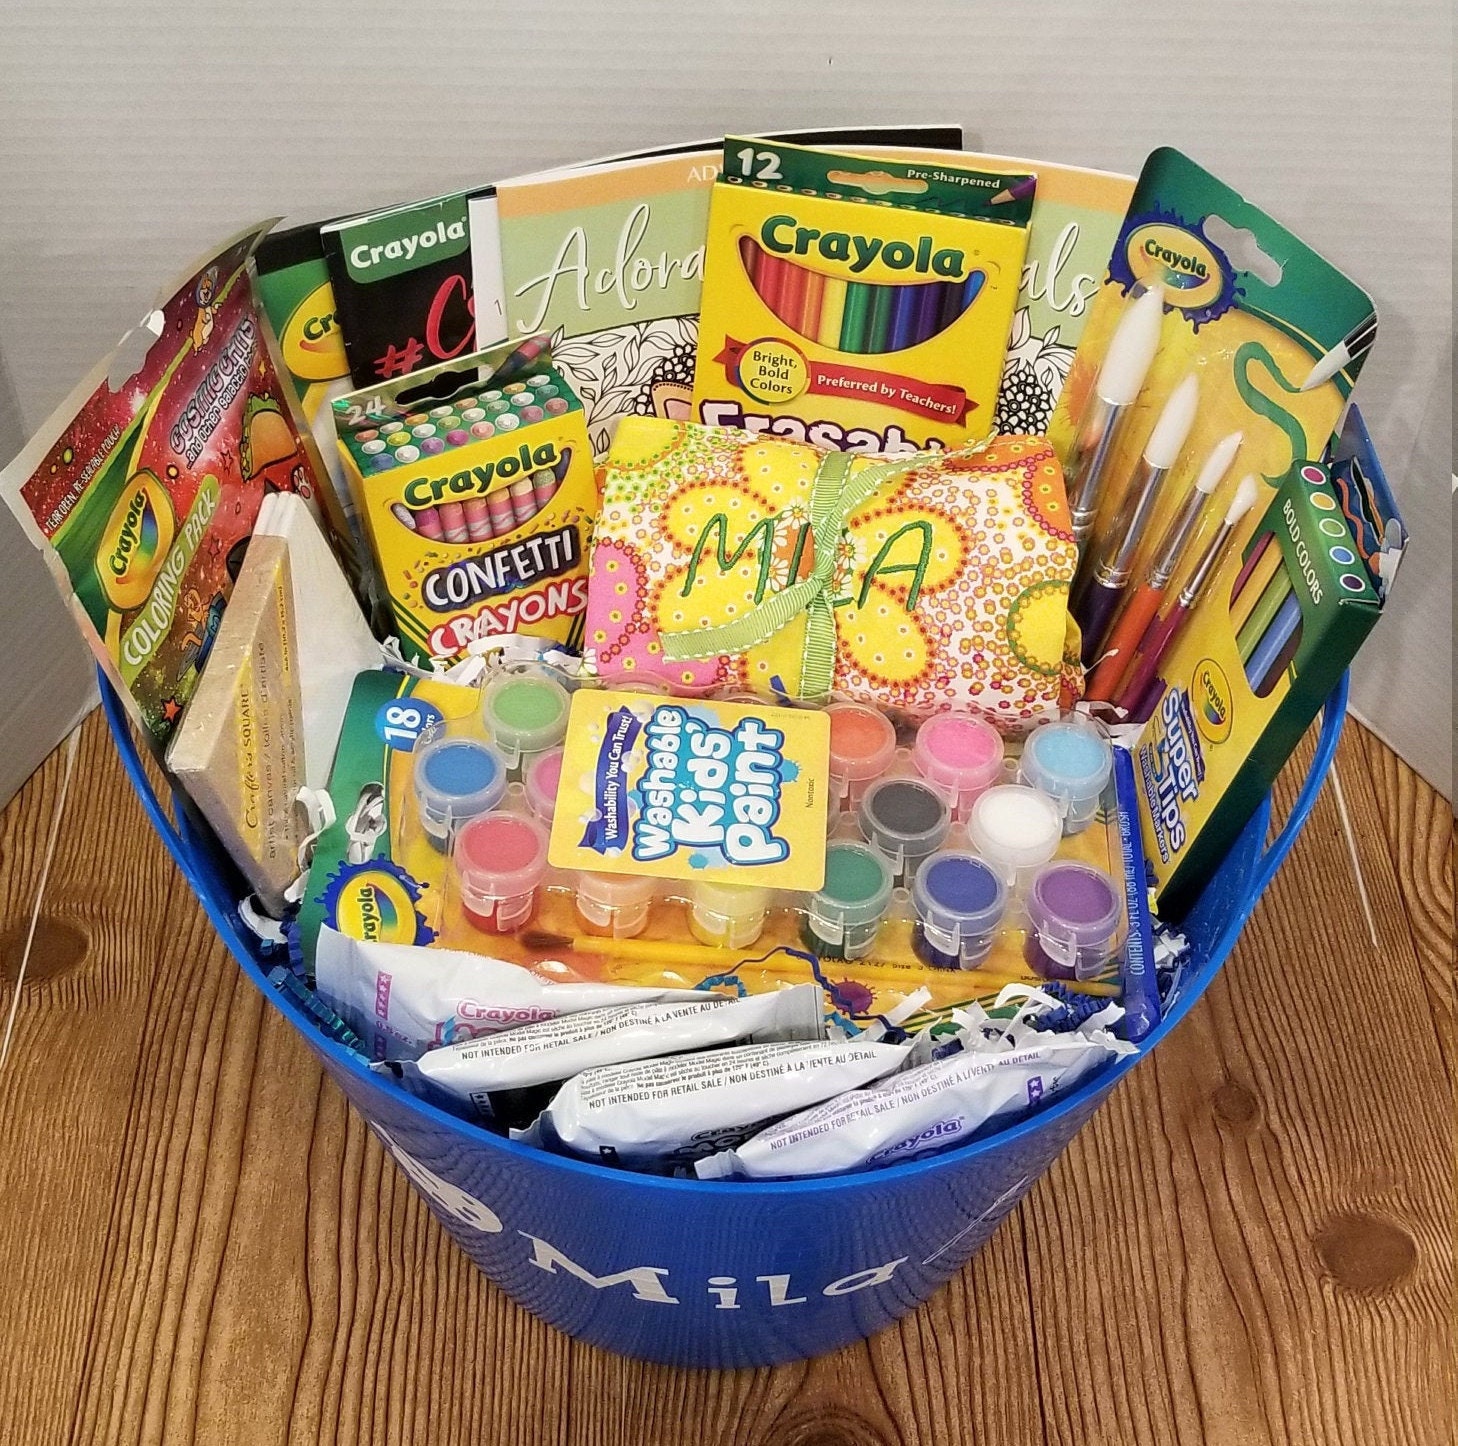 Adult Coloring Book Gift Basket - Buy Online Now!